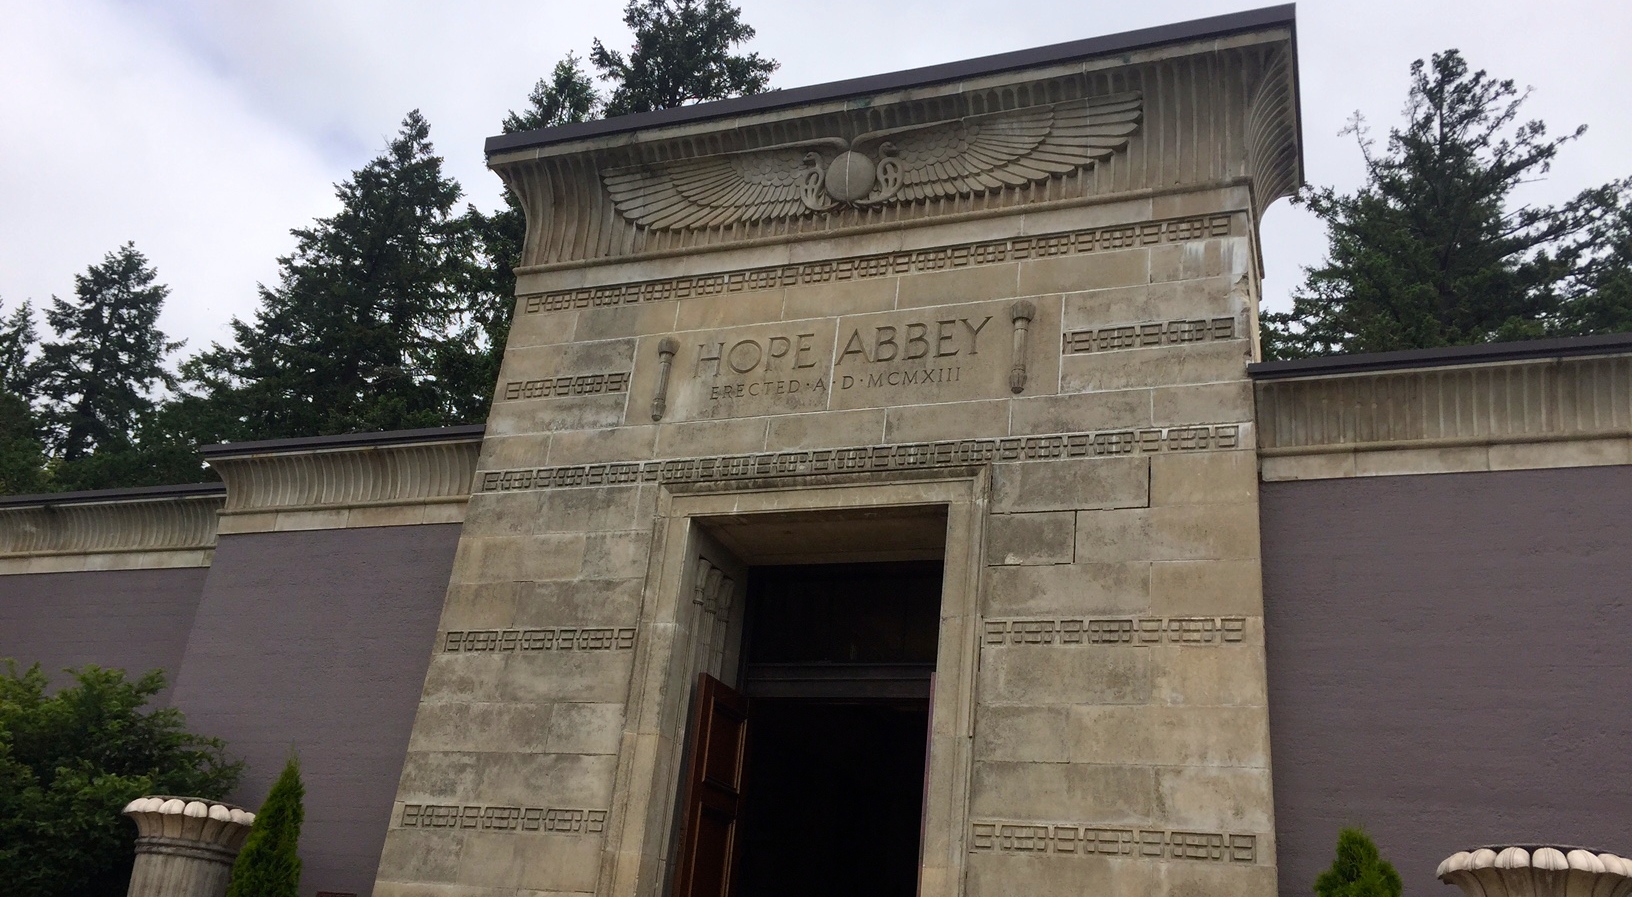 It’s “Music to Die For,” but don’t worry, it’s only a turn-of-phrase when you take in the concert on Sunday, June 25,at the Hope Abbey Mausoleum